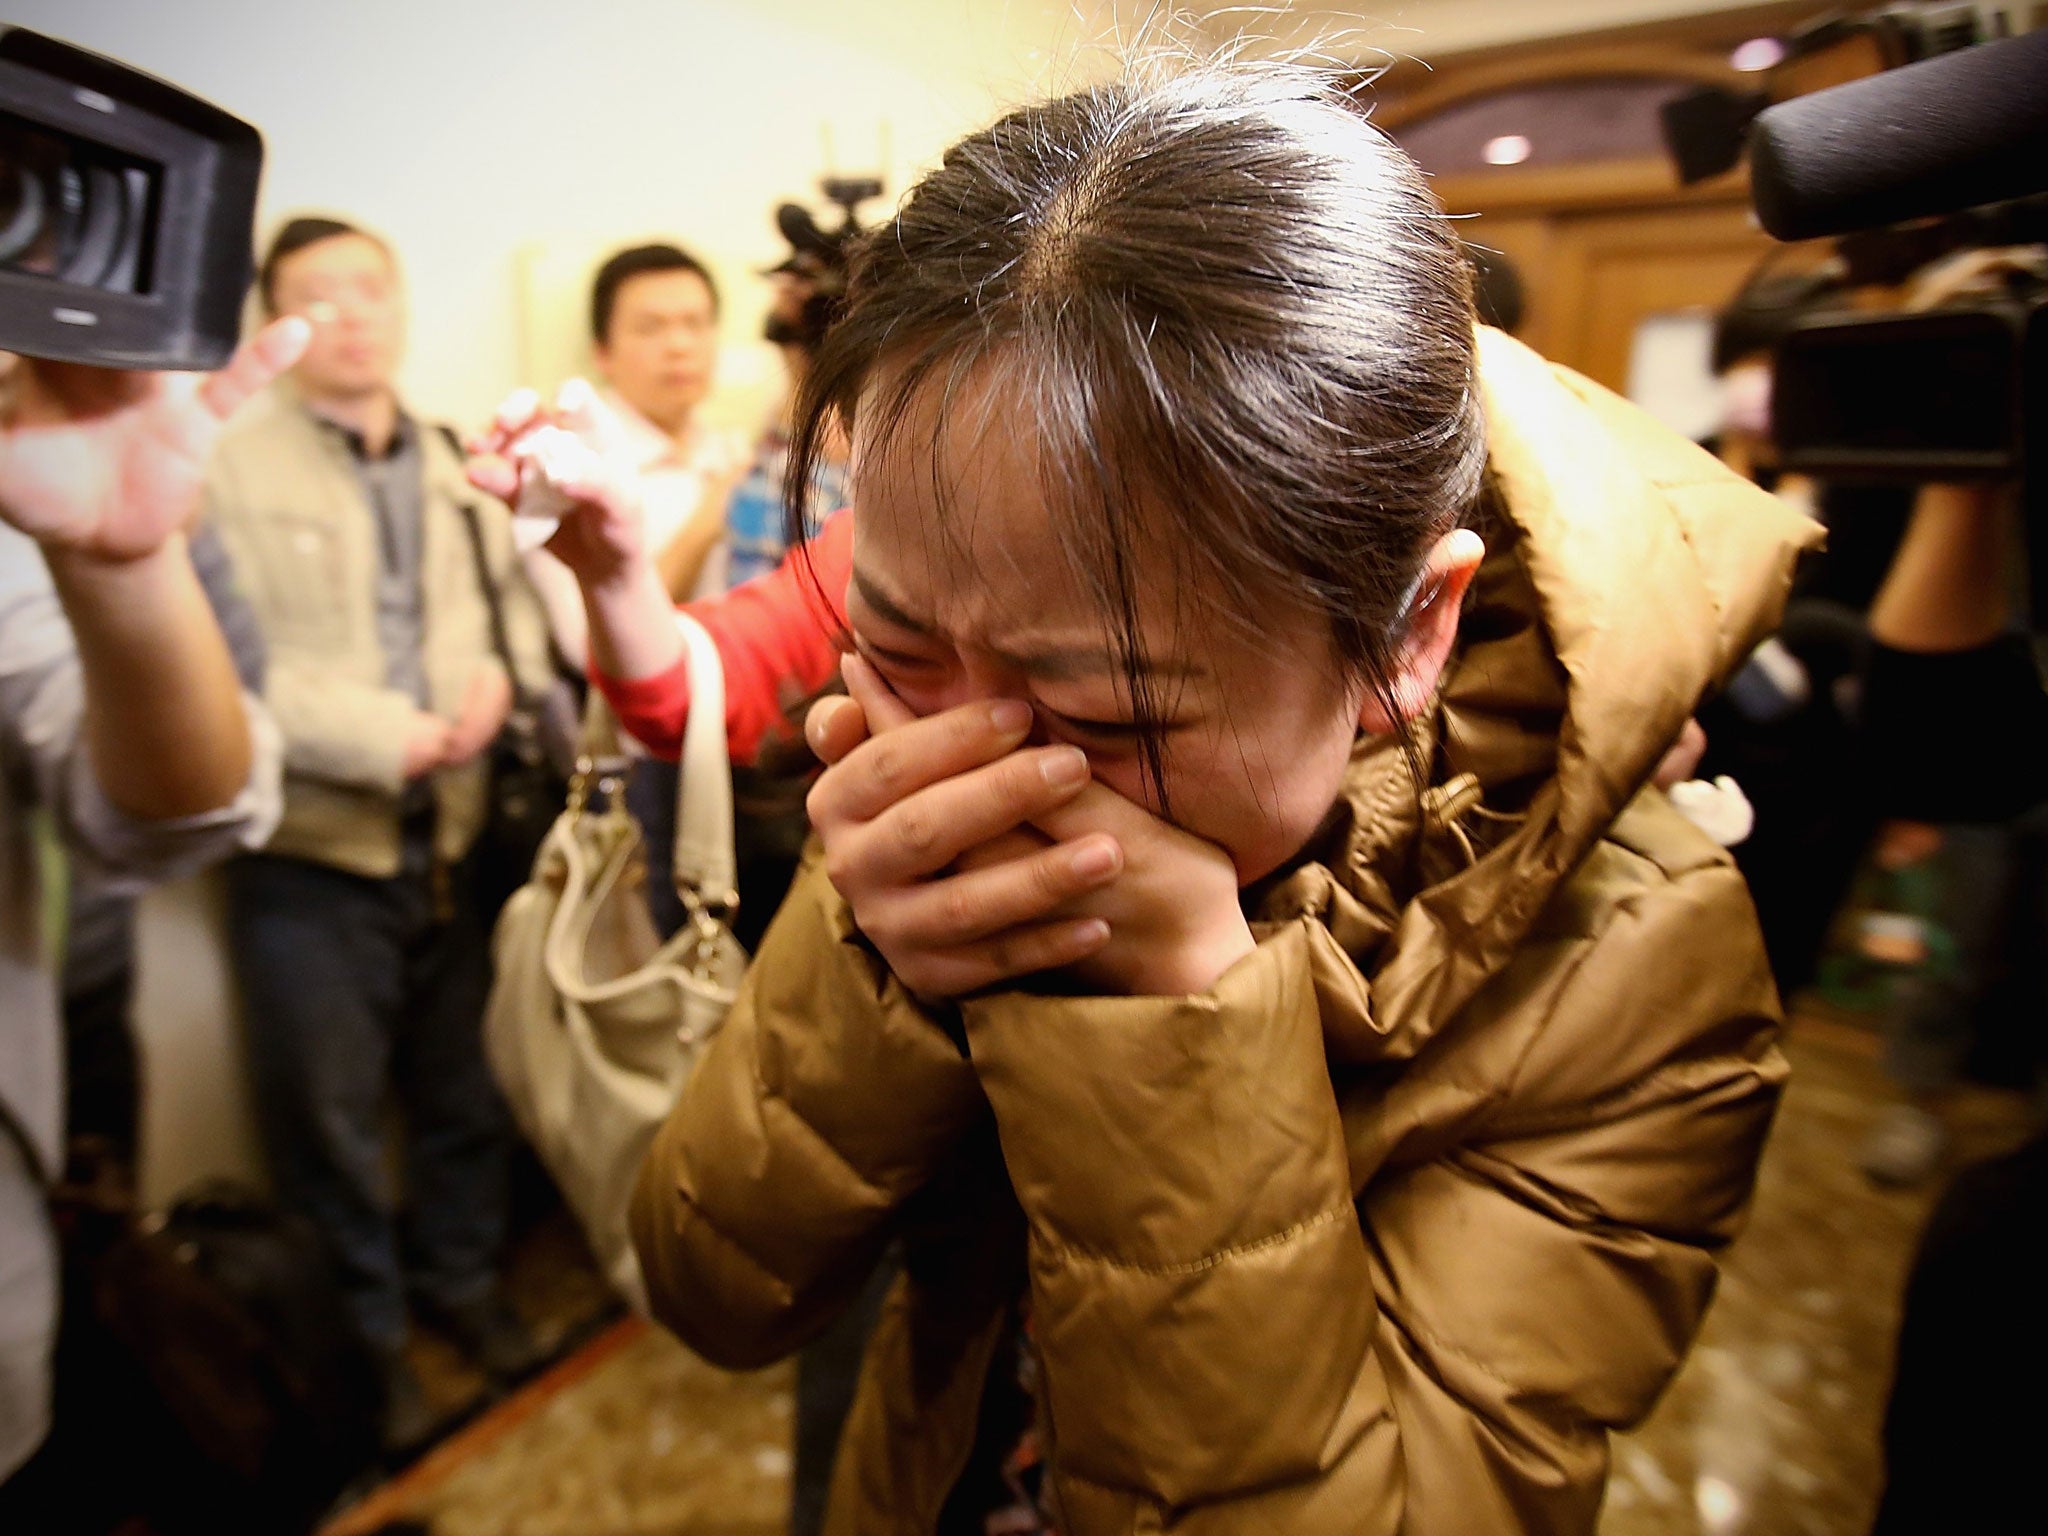 A relative of a passenger onboard Malaysia Airlines flight MH370 cries out at a local hotel where families are gathered